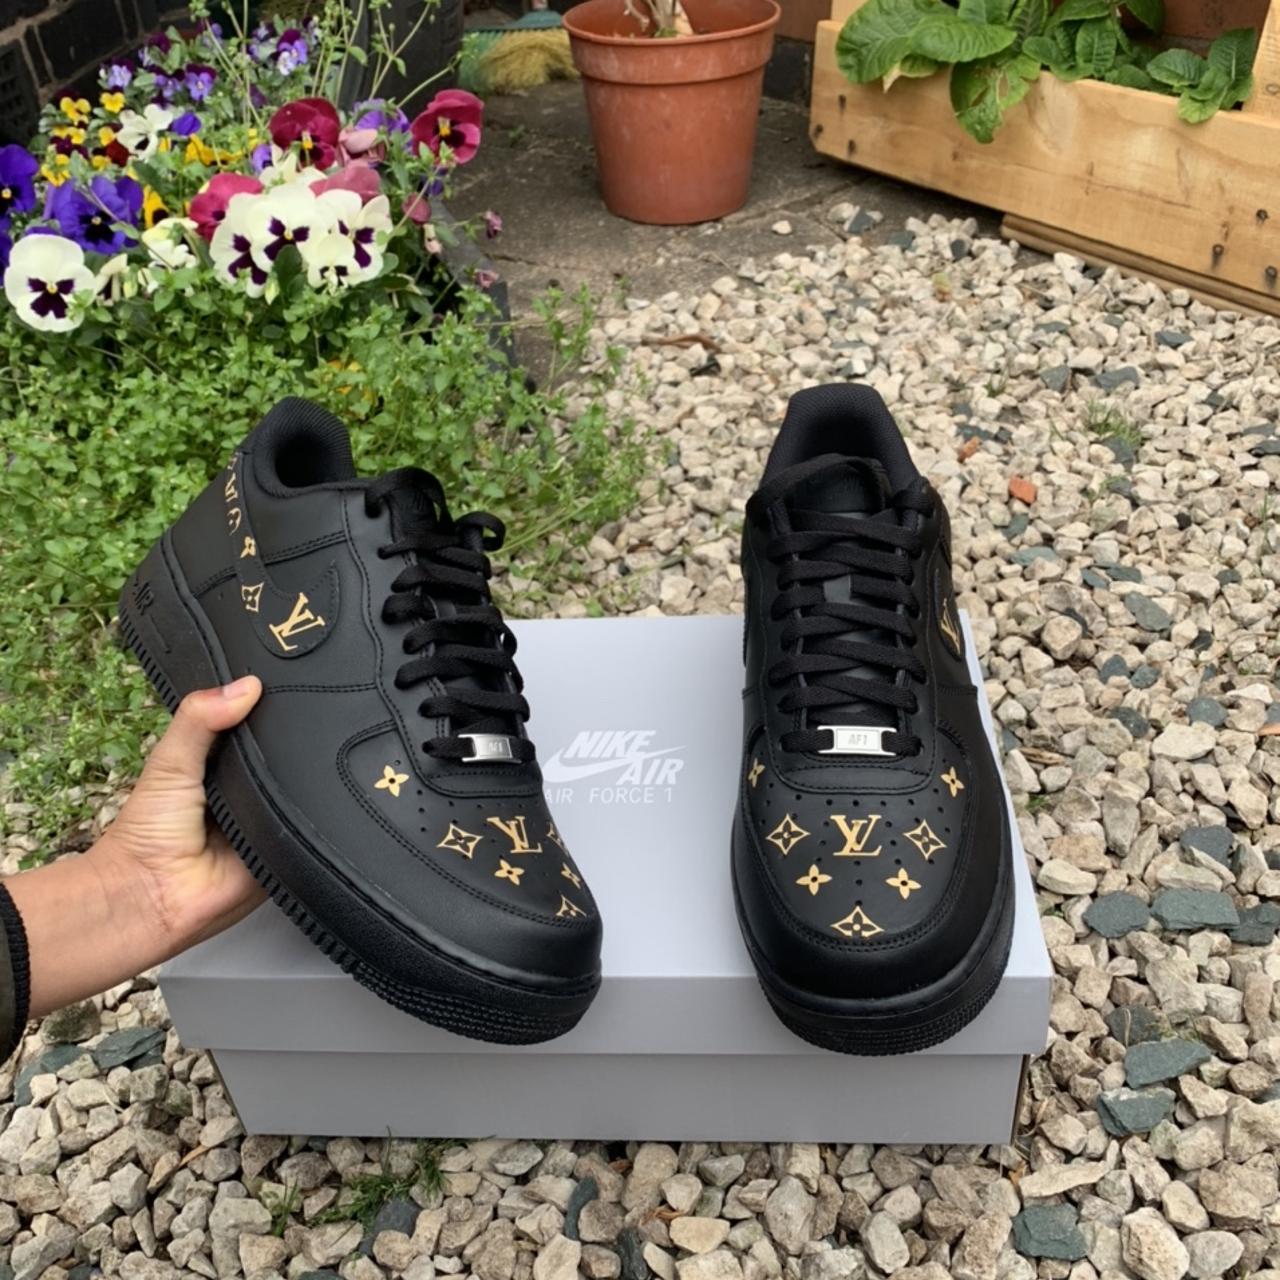 LV CUSTOM Air Force 1's Shoes included! If you - Depop